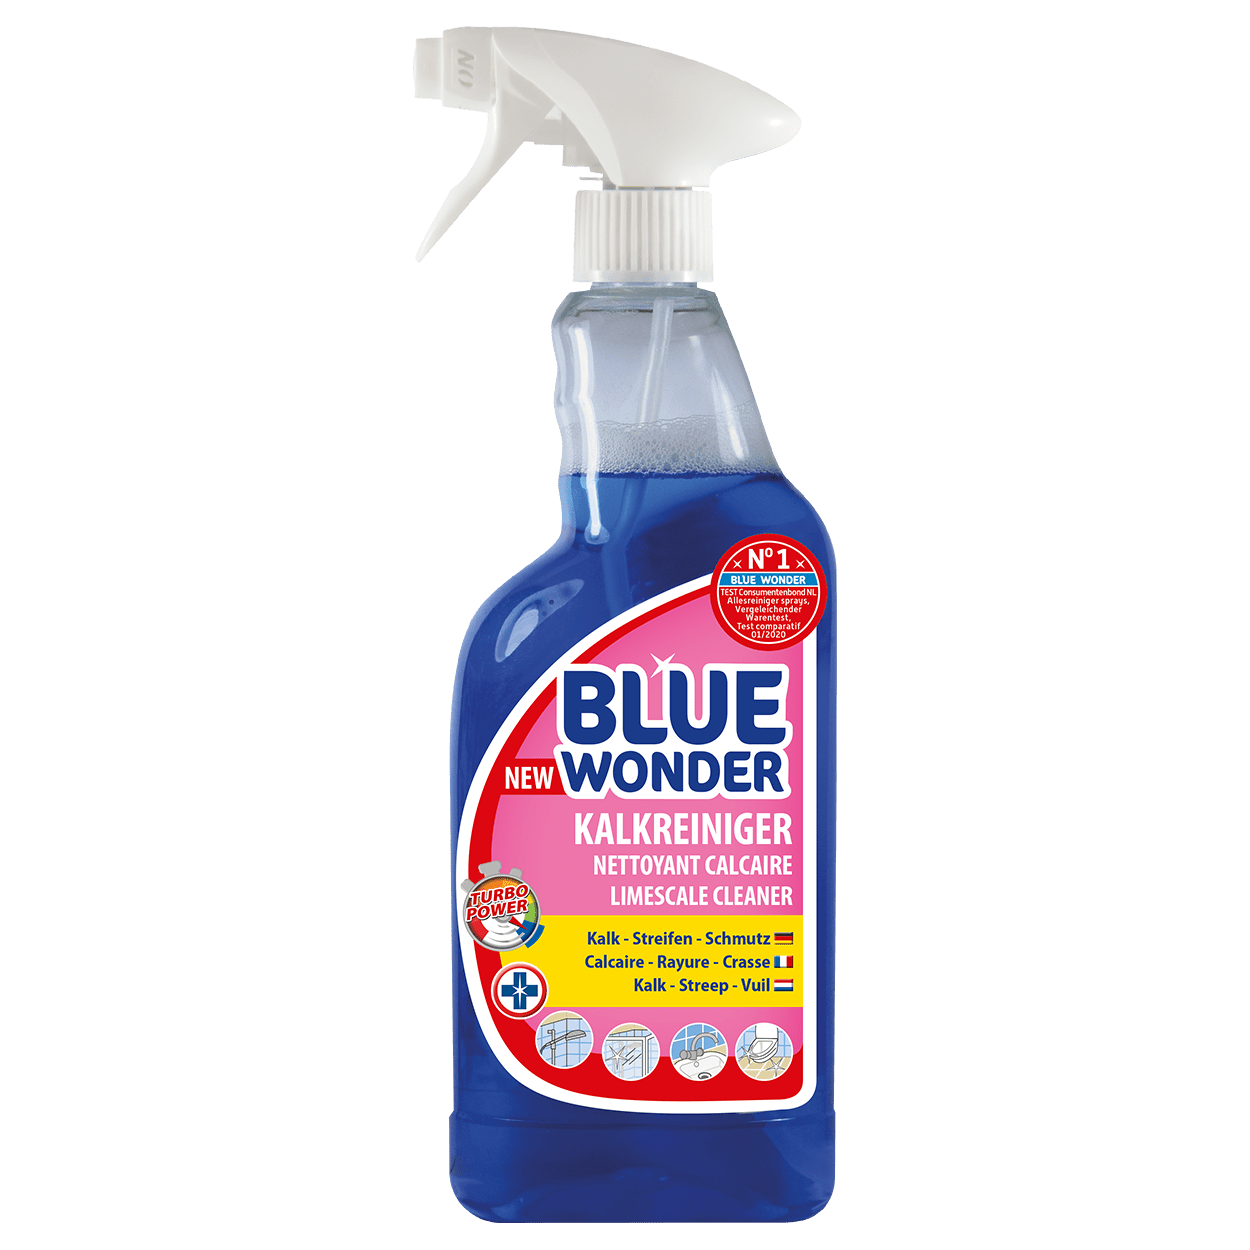 Powerful descaling cleaning agent. Removes scale, soap residue and skin oils from, amongst others, washing basins, taps, showers, baths, tiles and sanitary units. Ready for use. Ideal for quick, daily cleaning jobs.